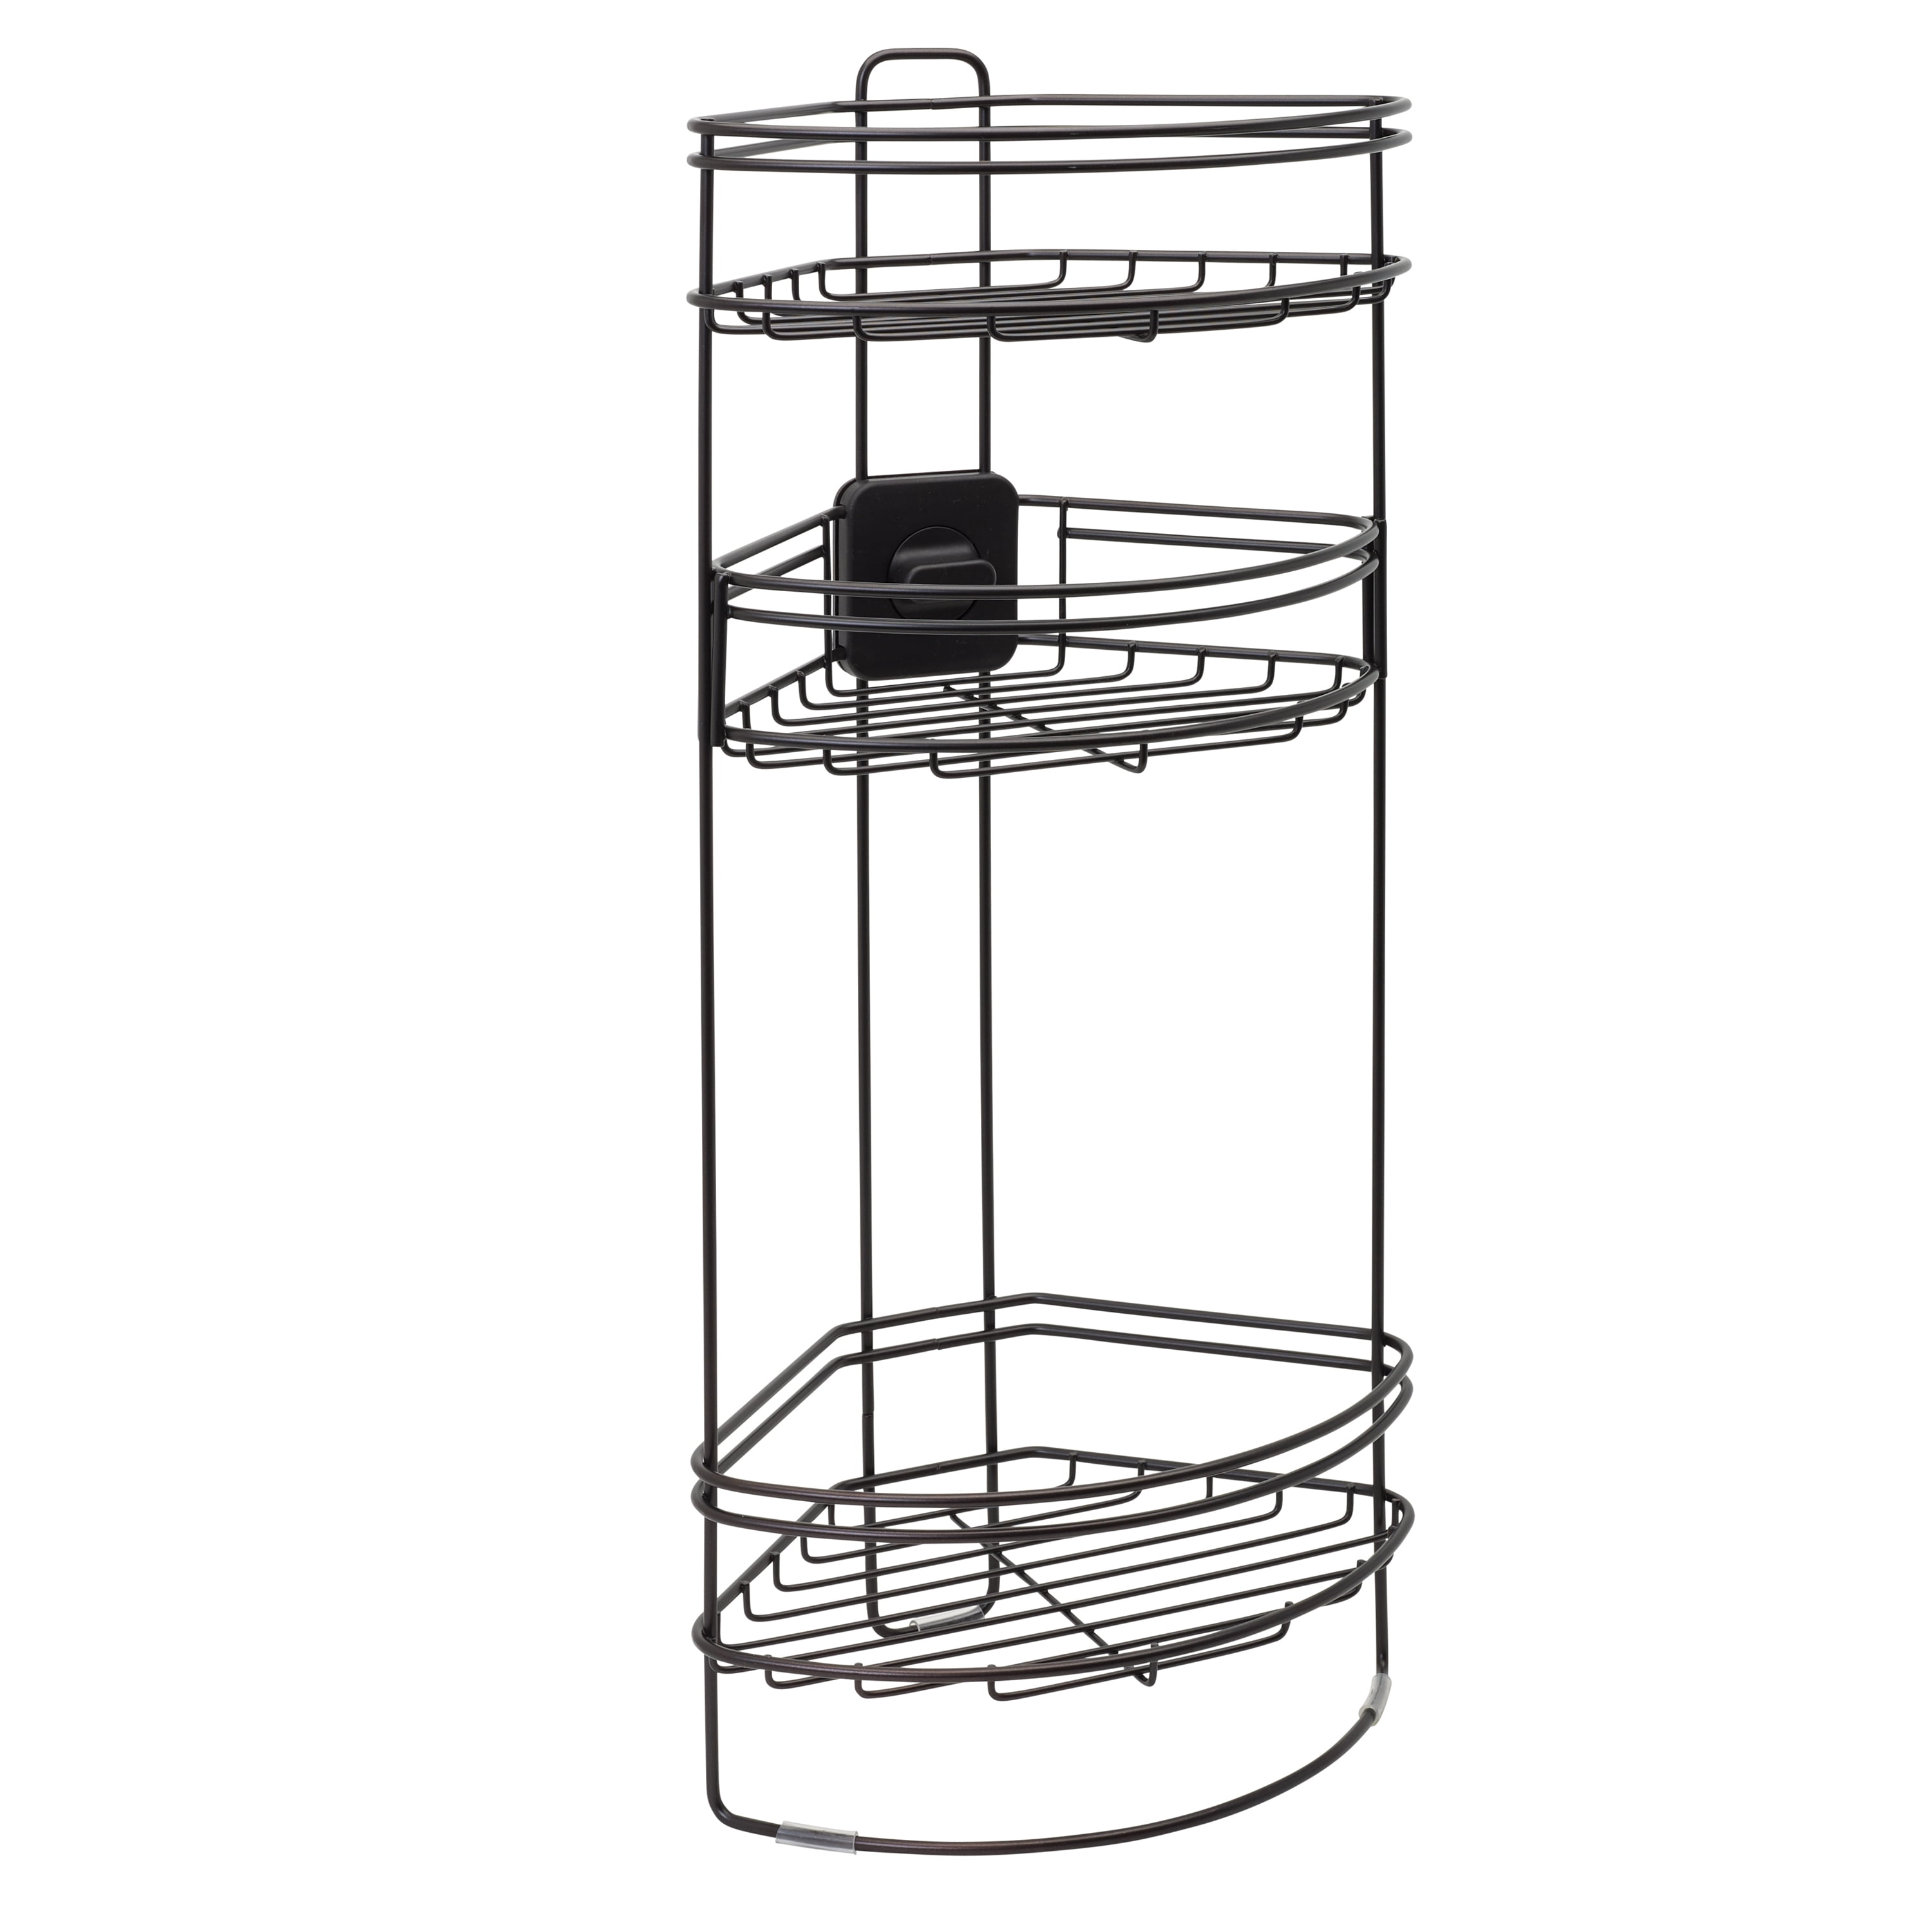 FineLine 4-Tier Shower Caddy  Stainless Steel Shower Baskets and Caddies -  Bath and Shower Accessories – Better Living Products USA